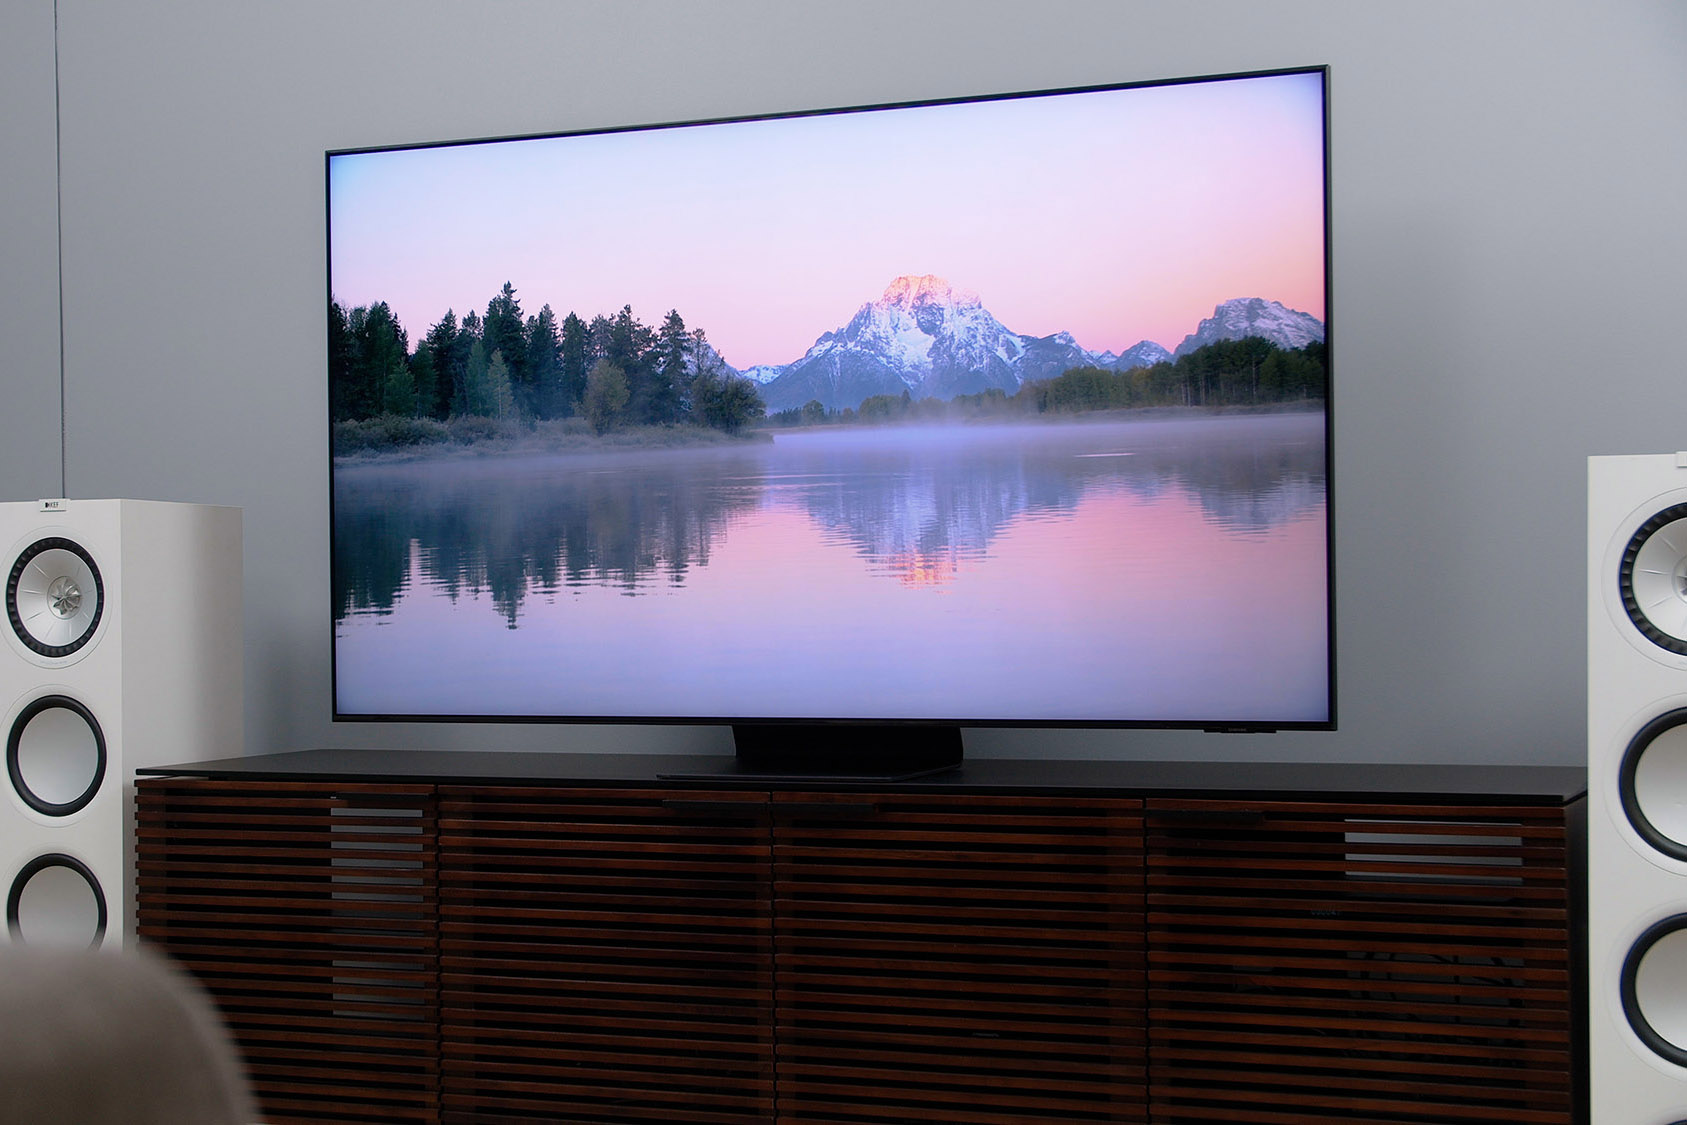  The best TV brands of 2022: From LG to TCL, which should you buy?